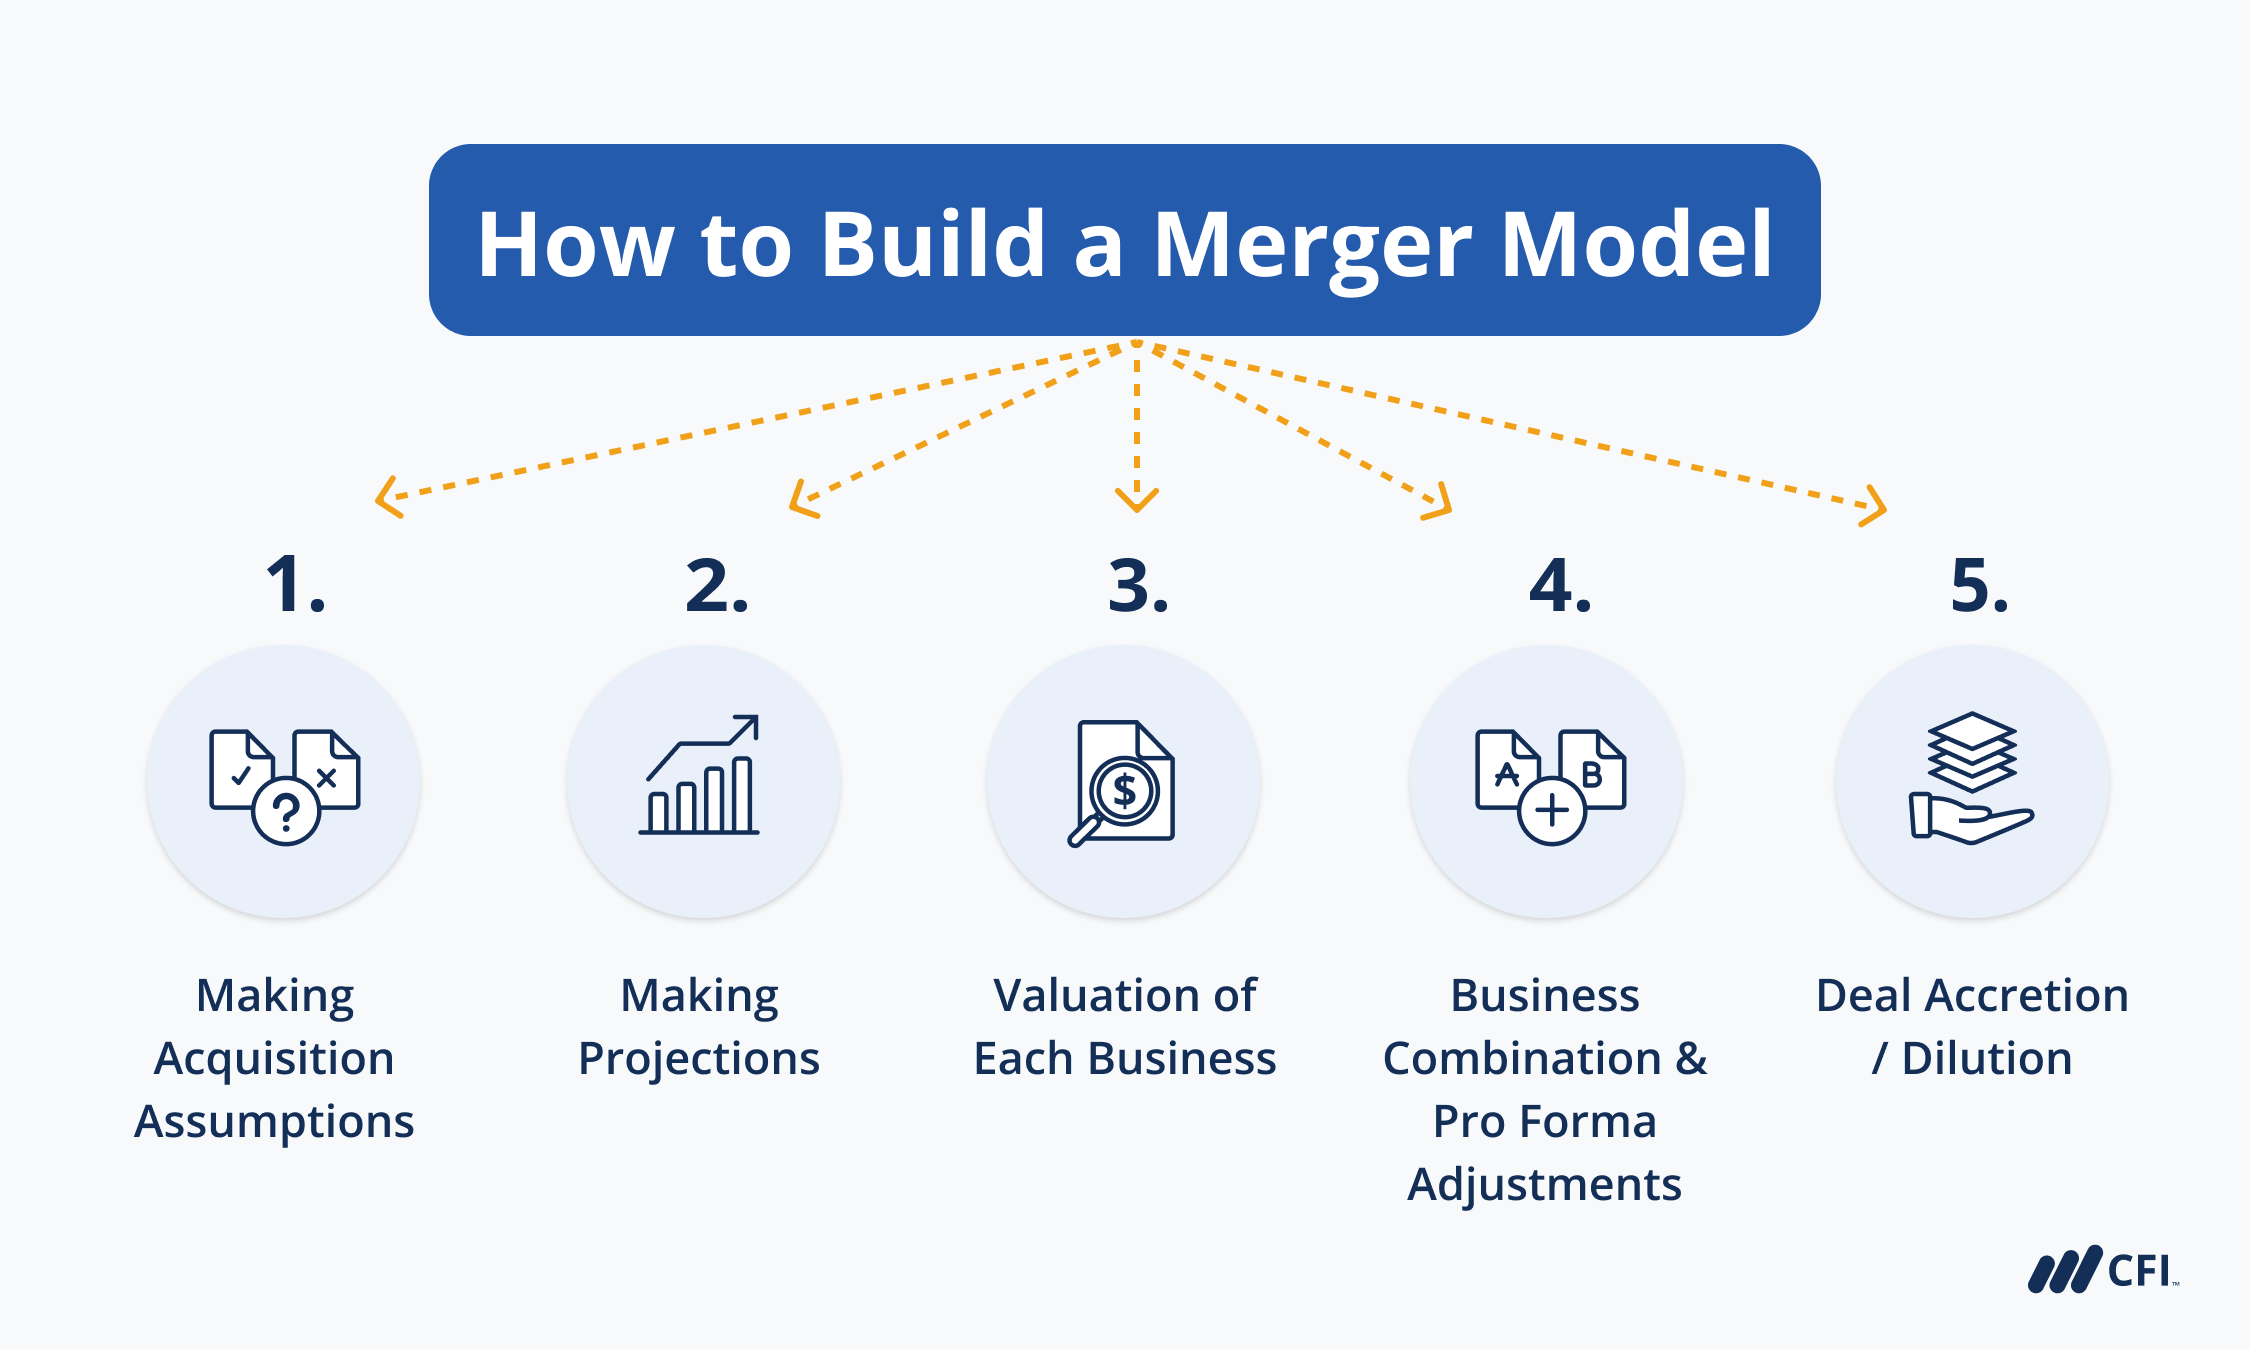 merger and acquisition case study examples